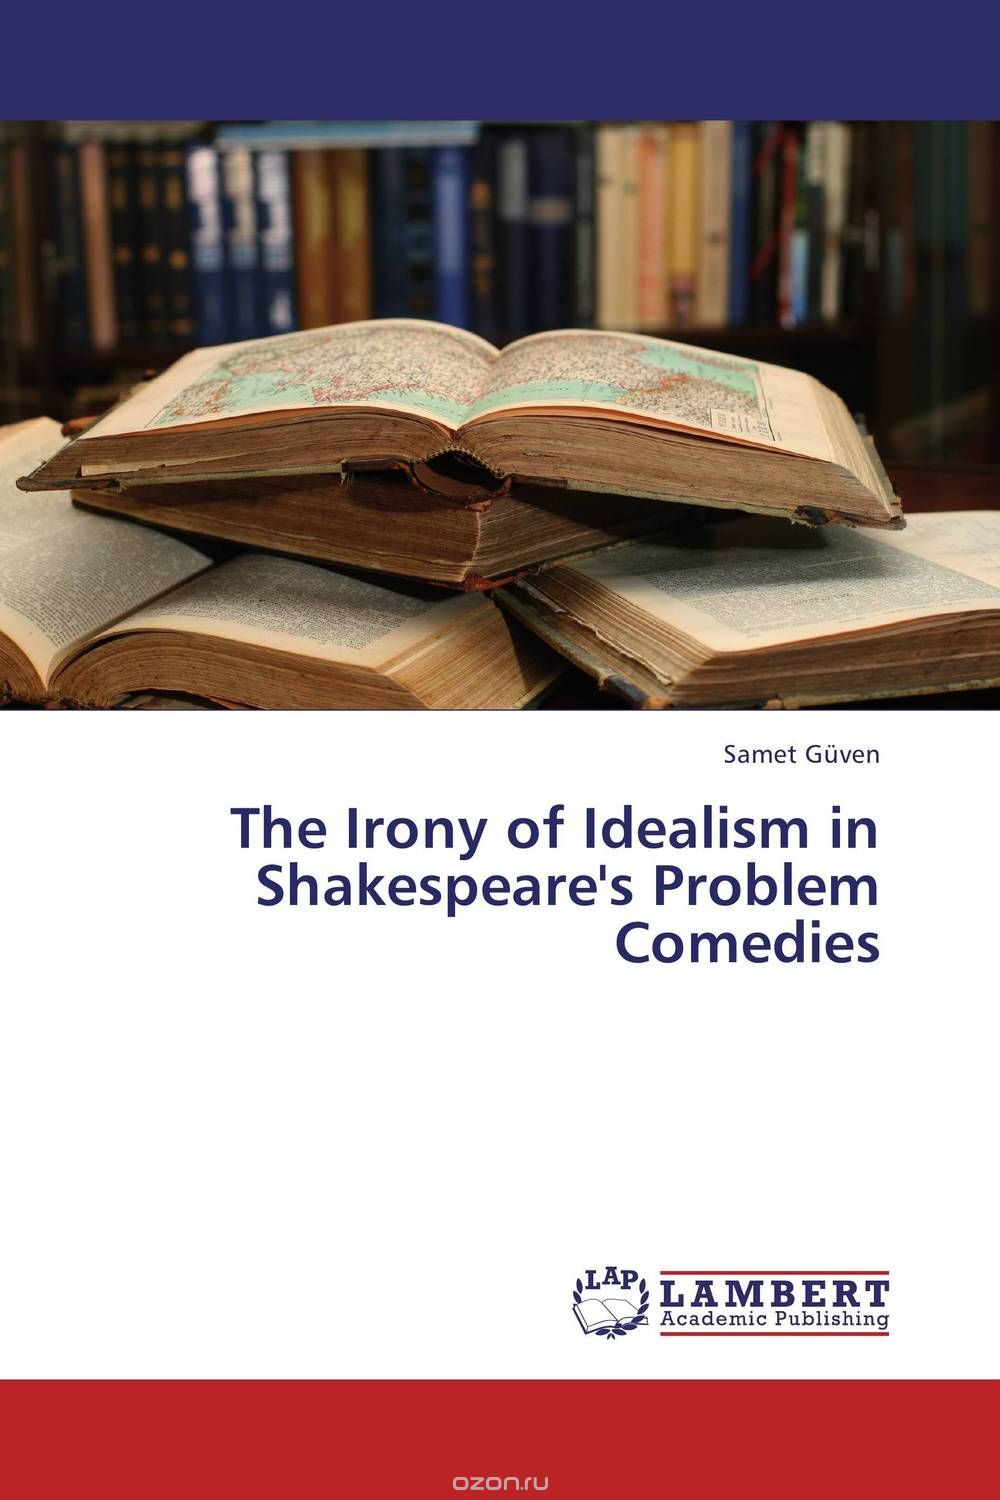 The Irony of Idealism in Shakespeare's Problem Comedies